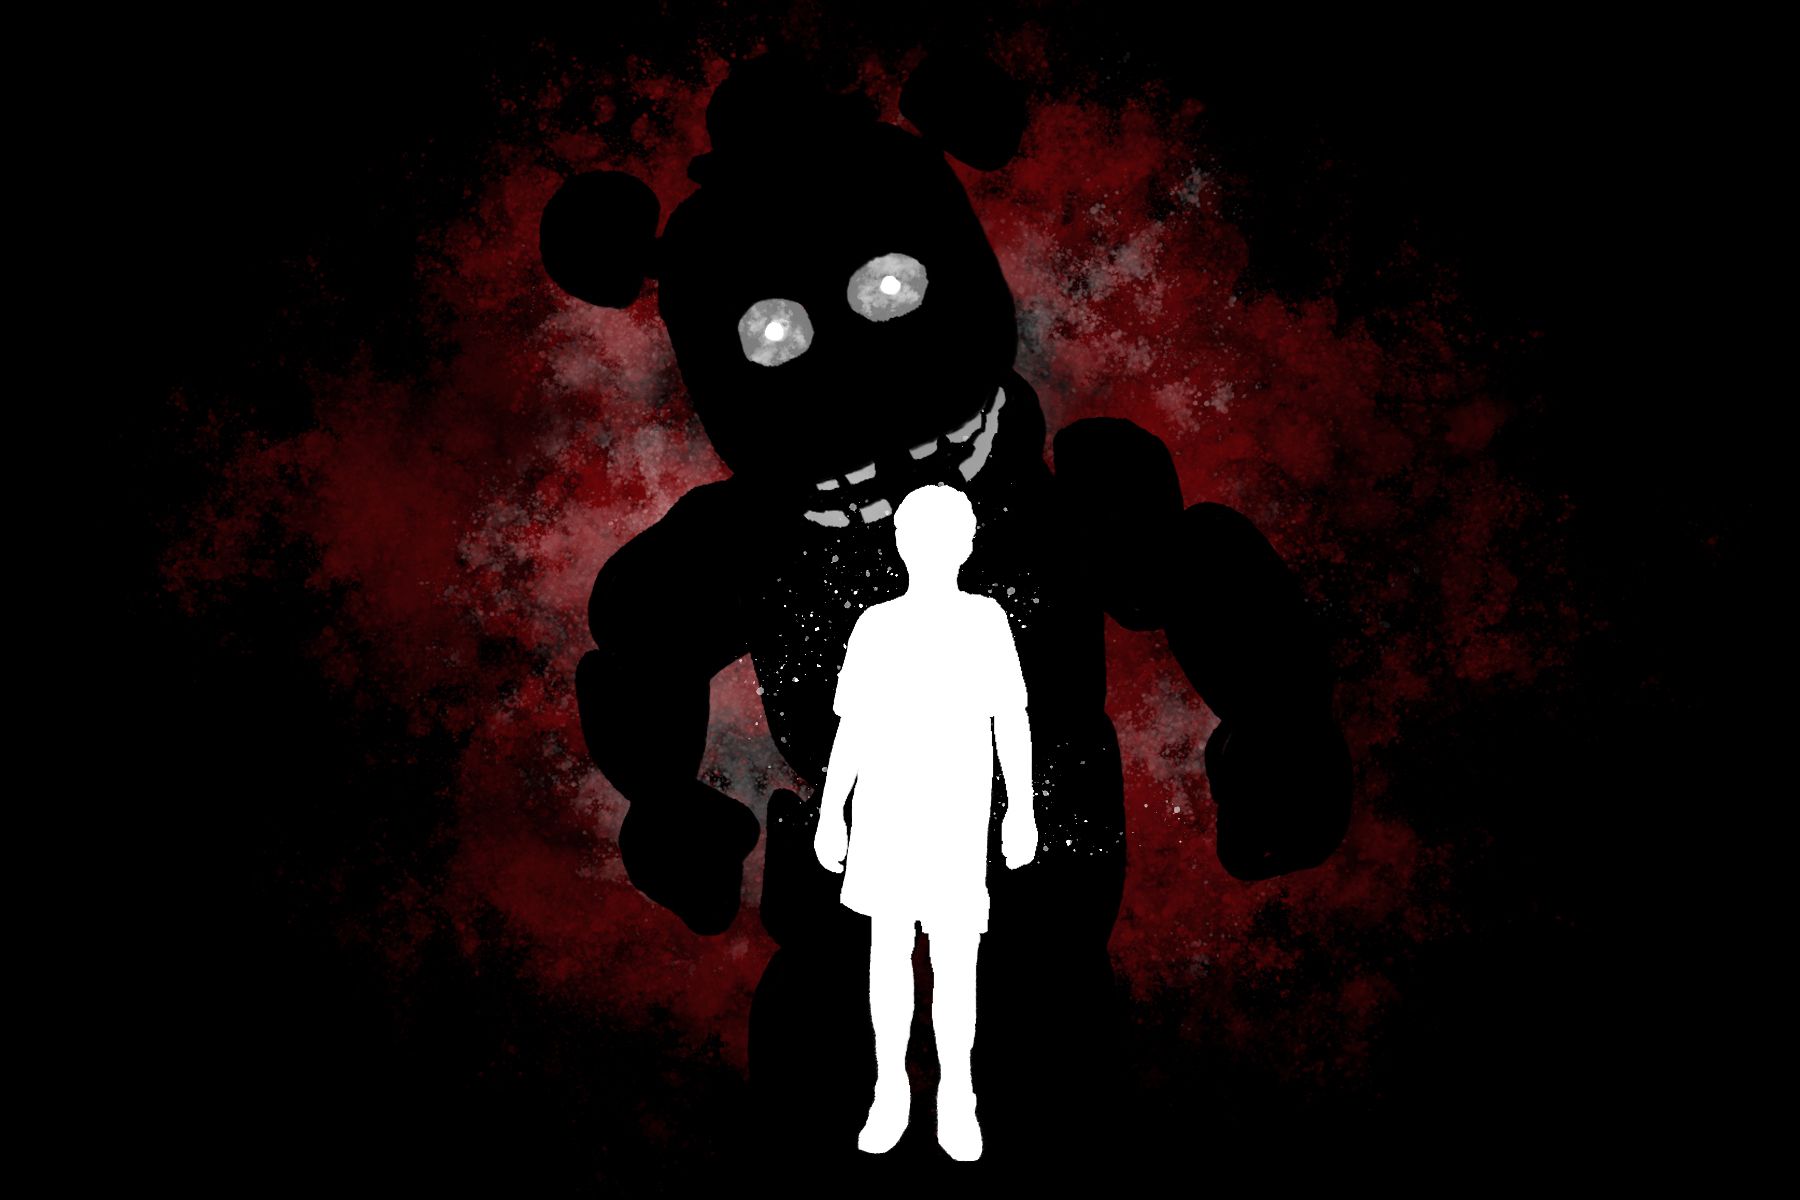 FNAF Has Had Success and Expansion Thanks to the Community